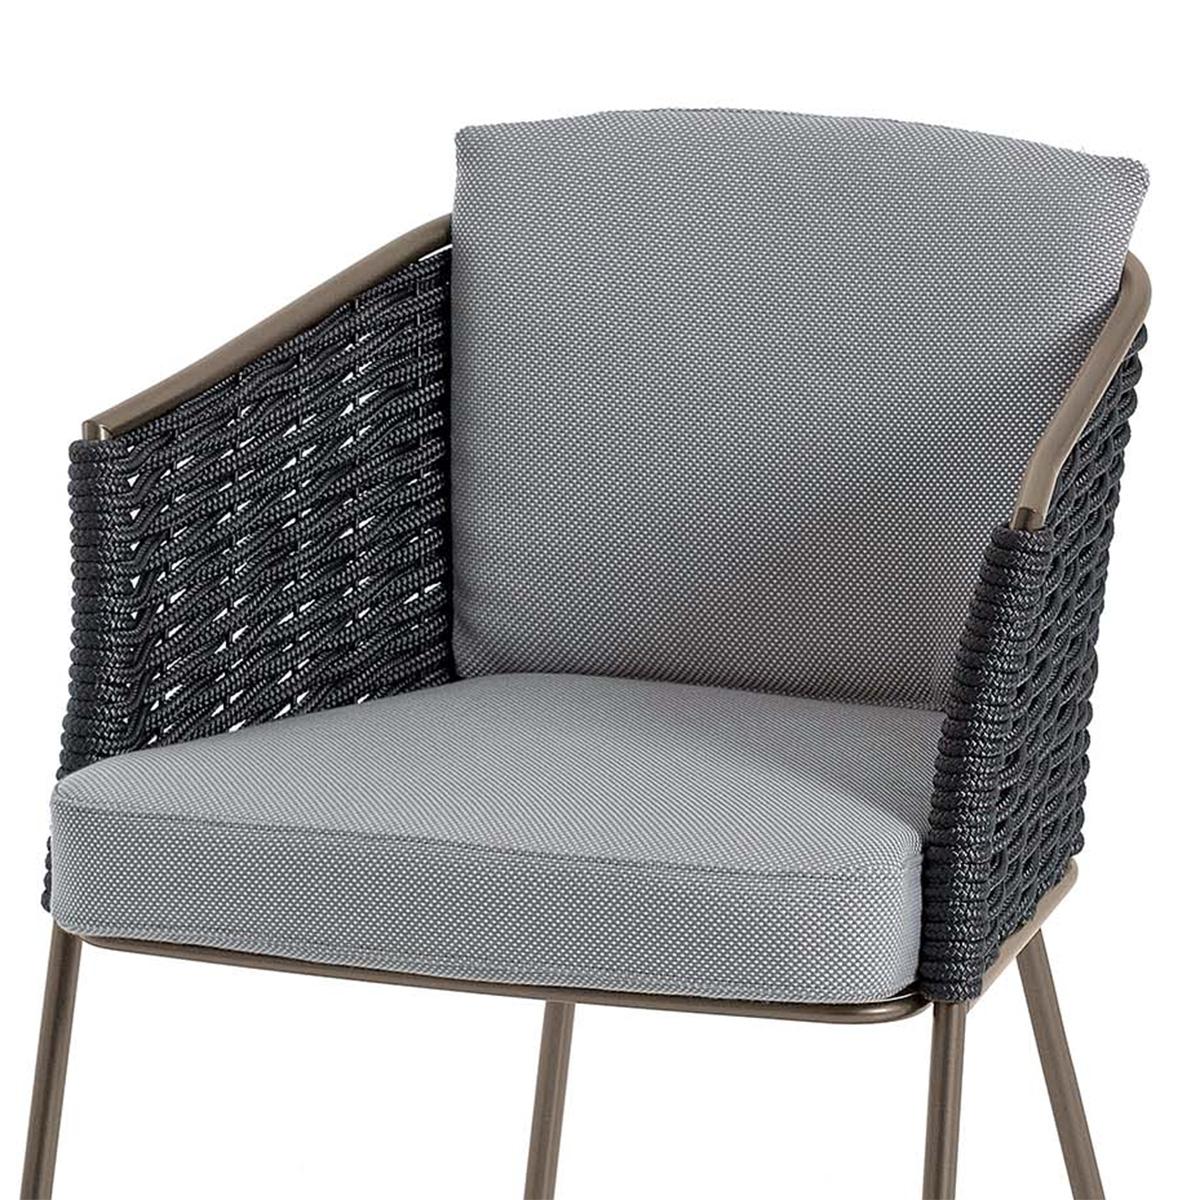 Italian Arena Outdoor Chair For Sale